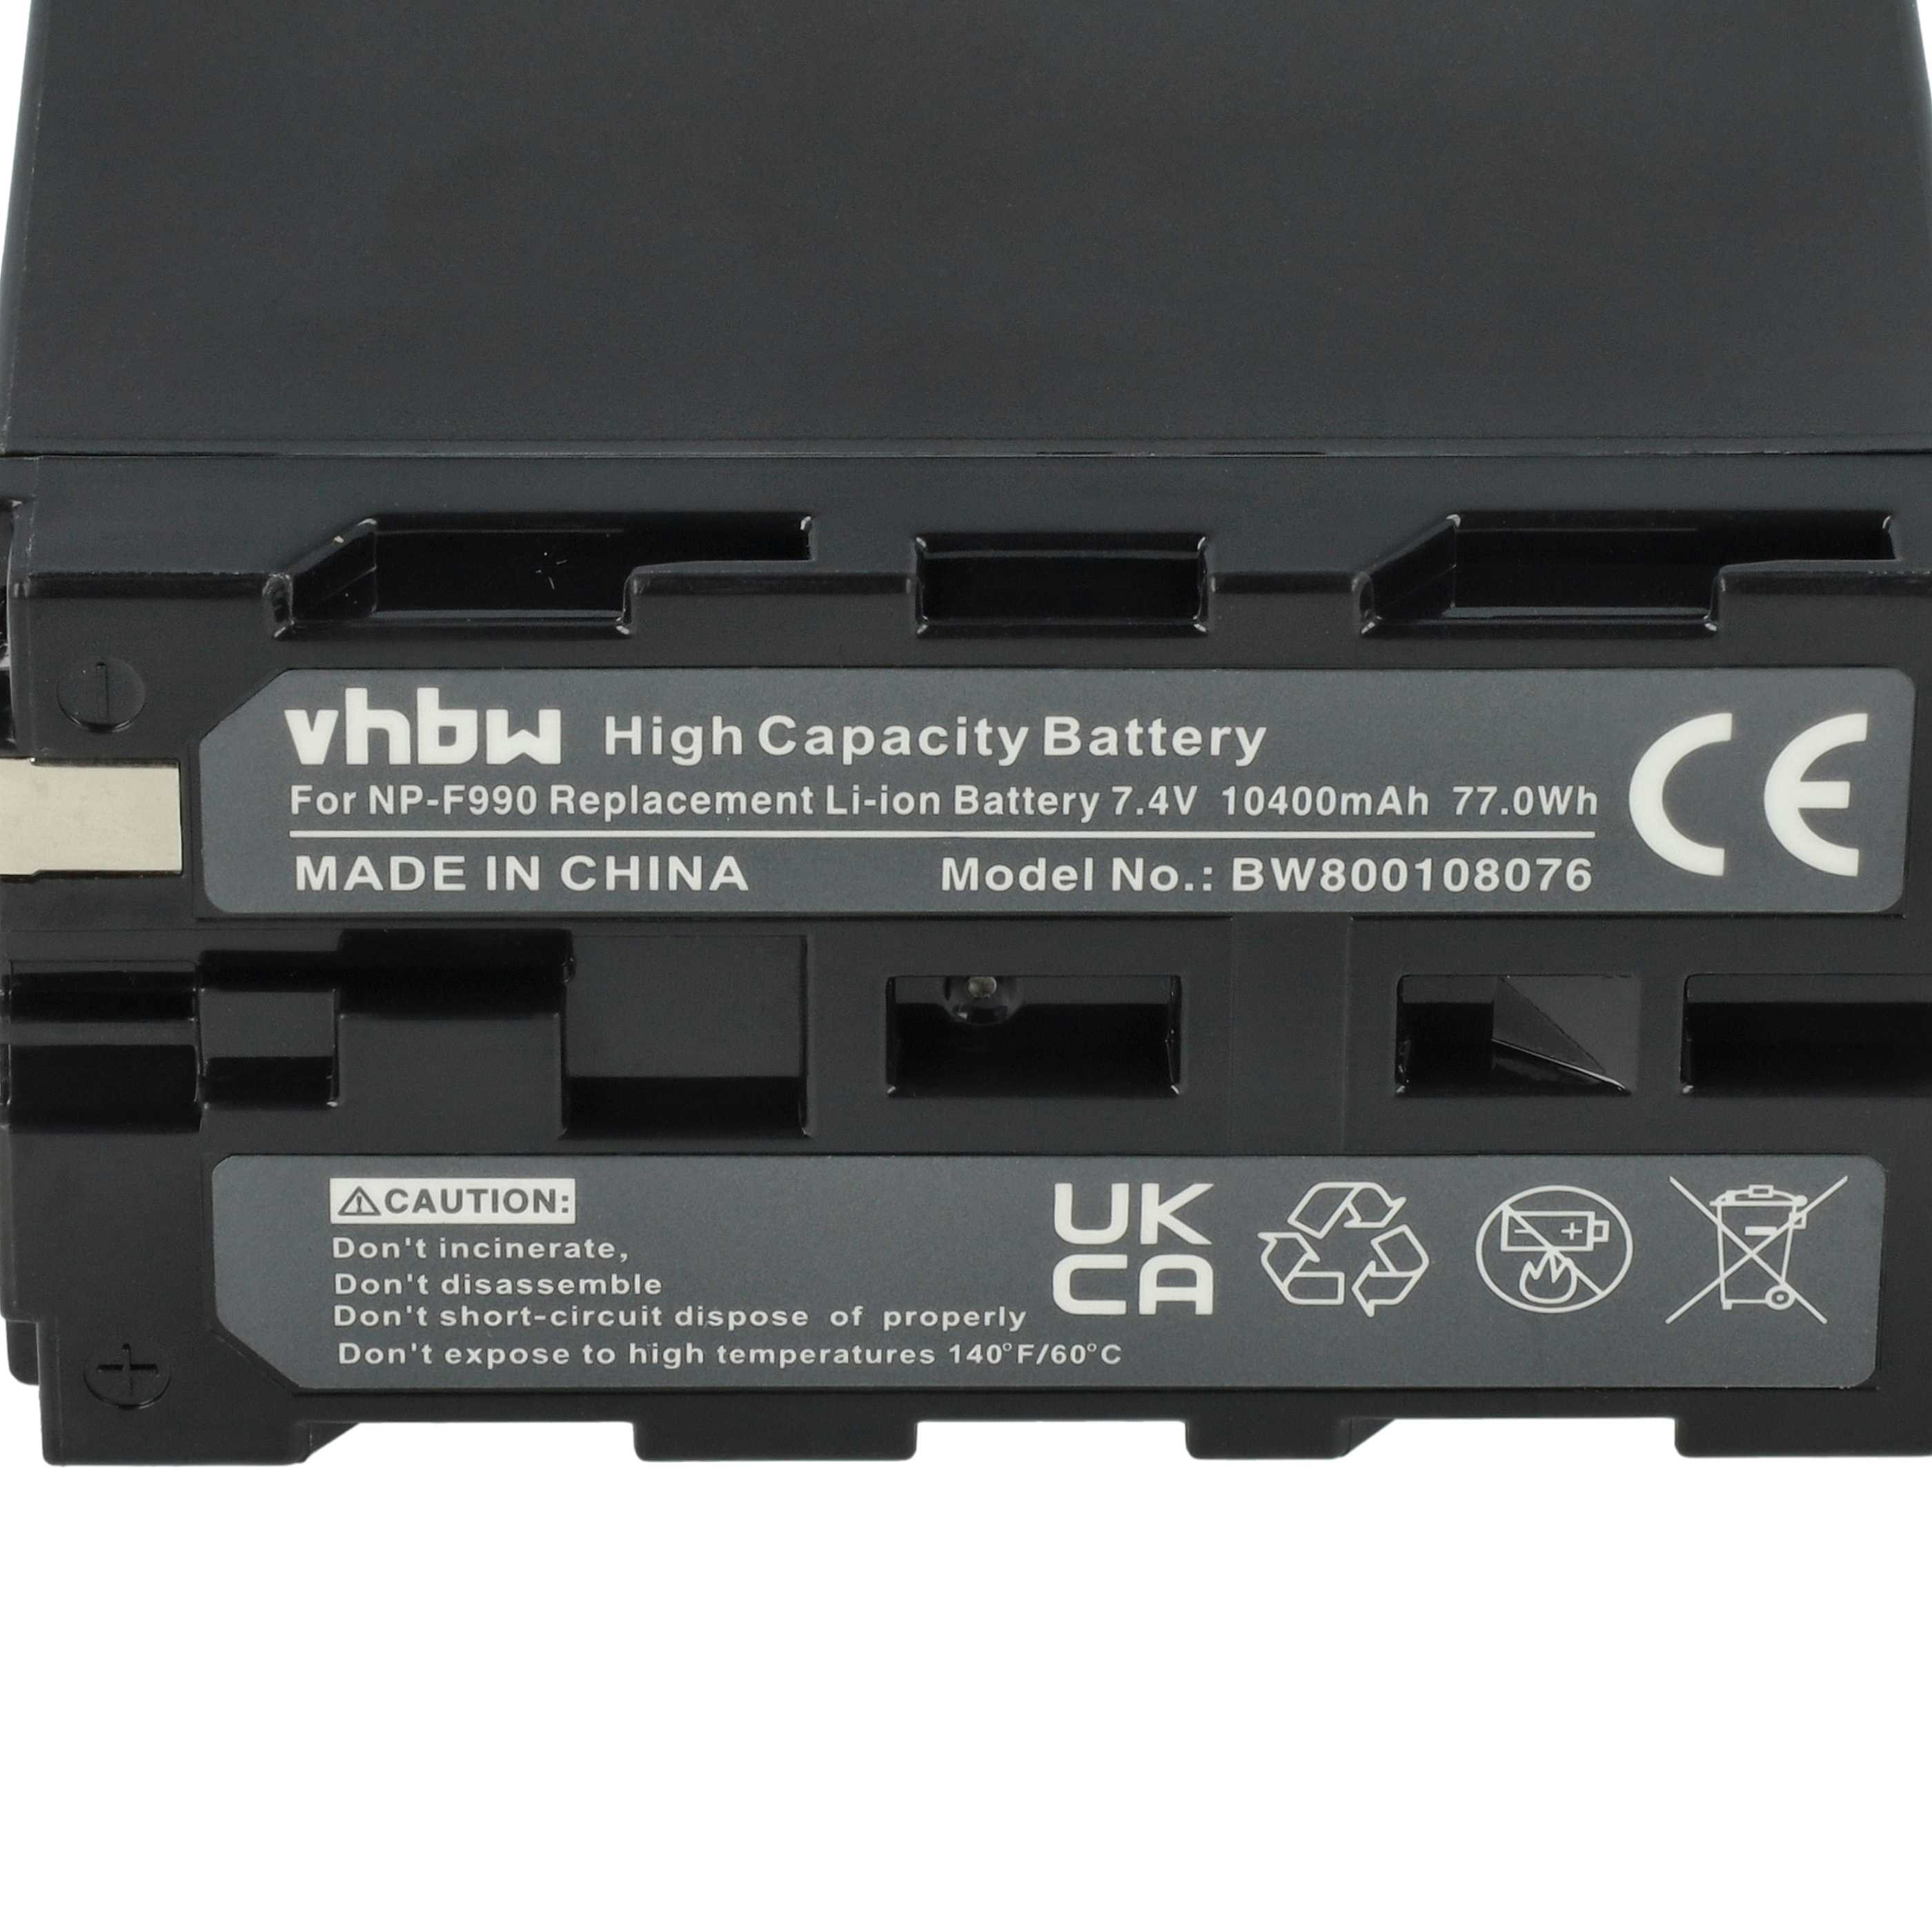 Videocamera Battery (3 Units) Replacement for Sony NP-F930, NP-F970, NP-F960, NP-F950 - 10400mAh 7.4V Li-Ion